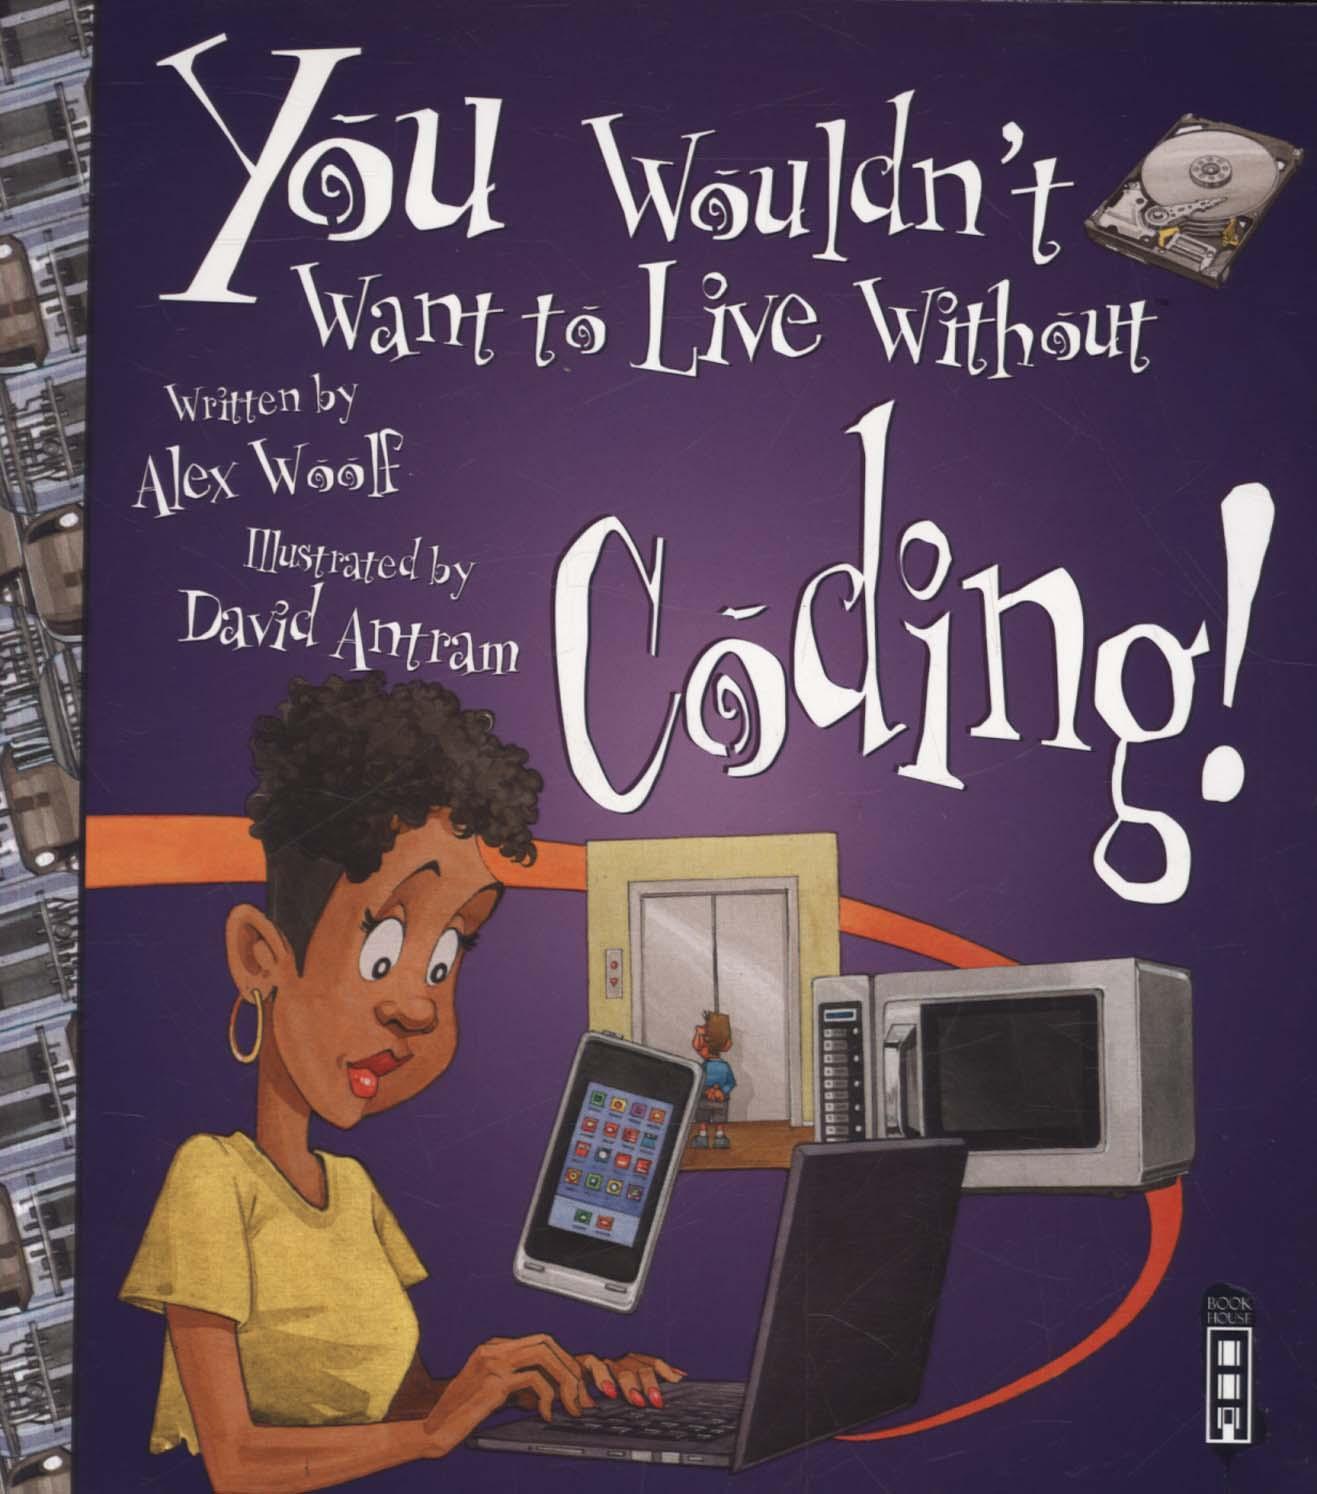 You Wouldn't Want To Live Without Coding!